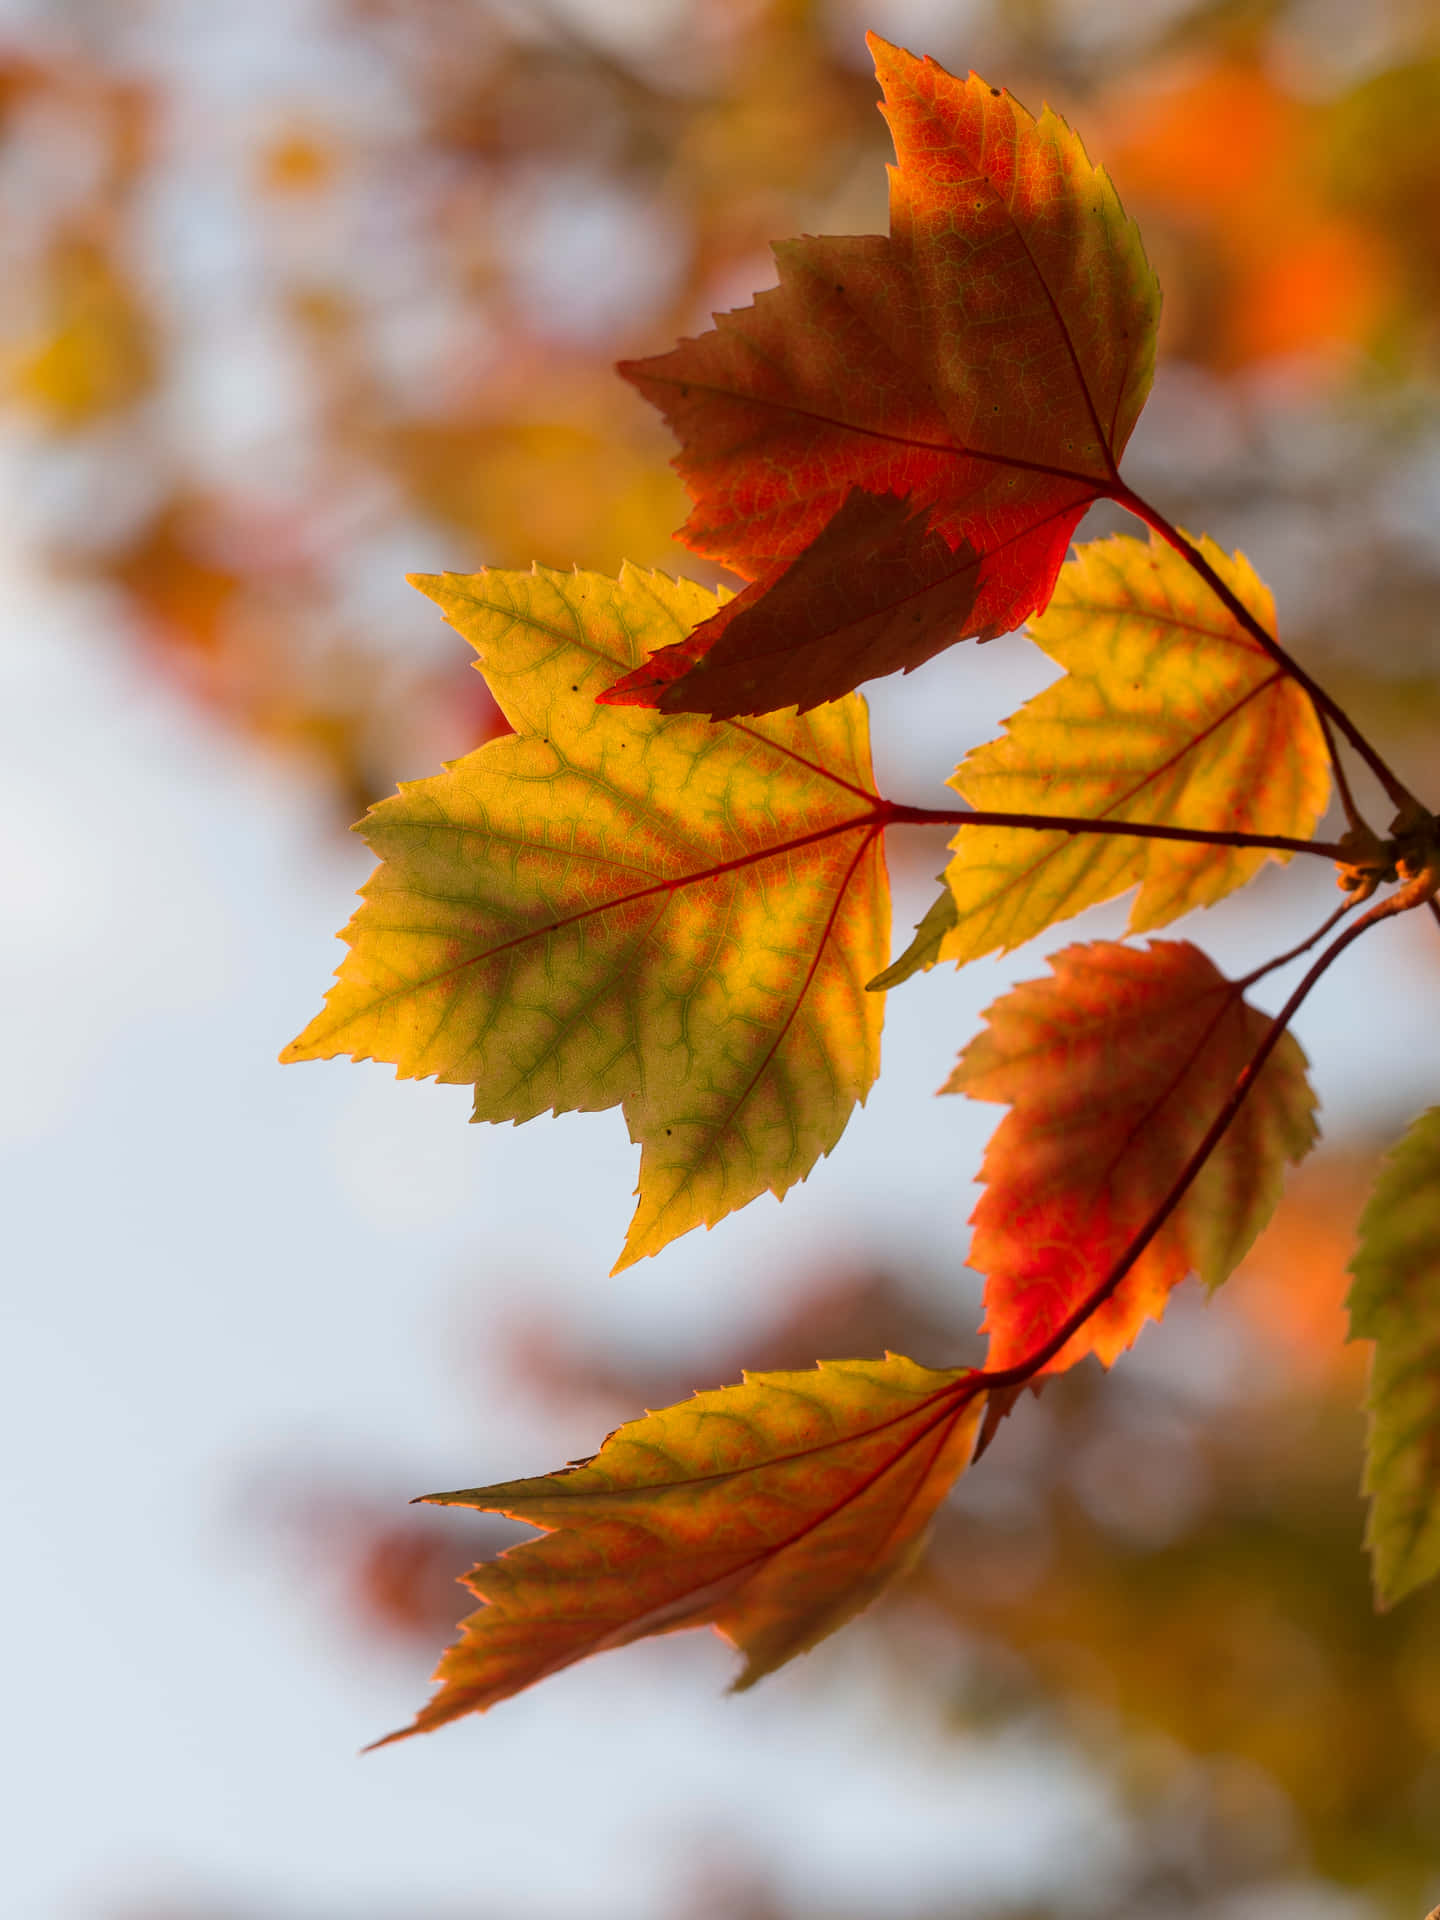 Enjoy The Beauty Of The Nature As The Leaves Start To Change Color In The Cool Fall Wallpaper